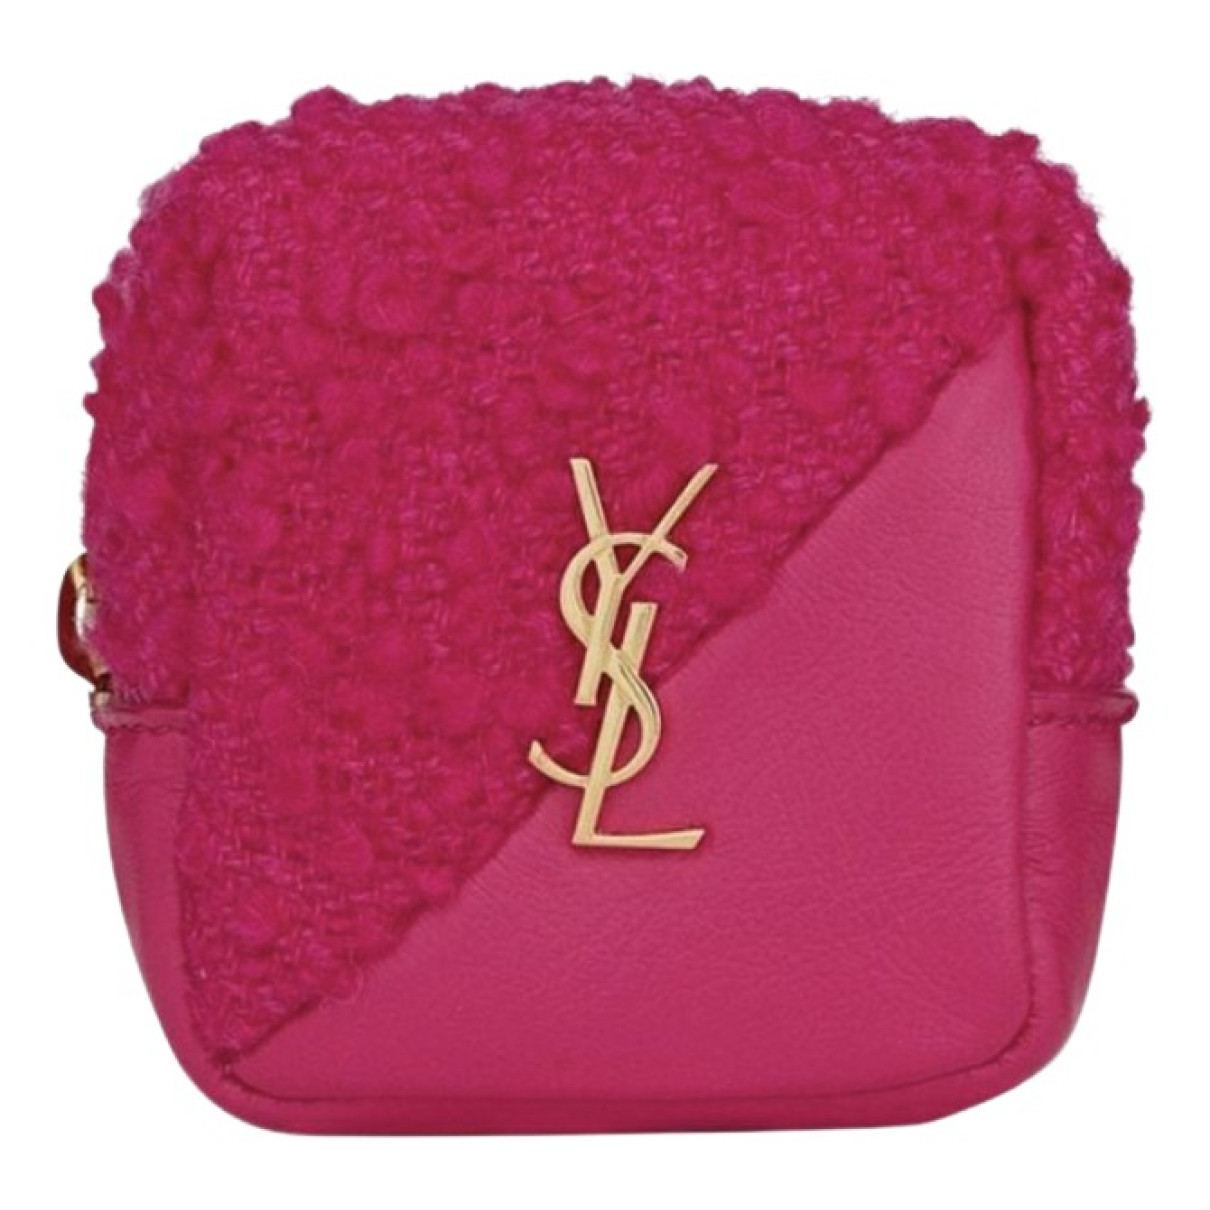 accessories Yves Saint Laurent purses, wallets & cases for Female Leather. Used condition